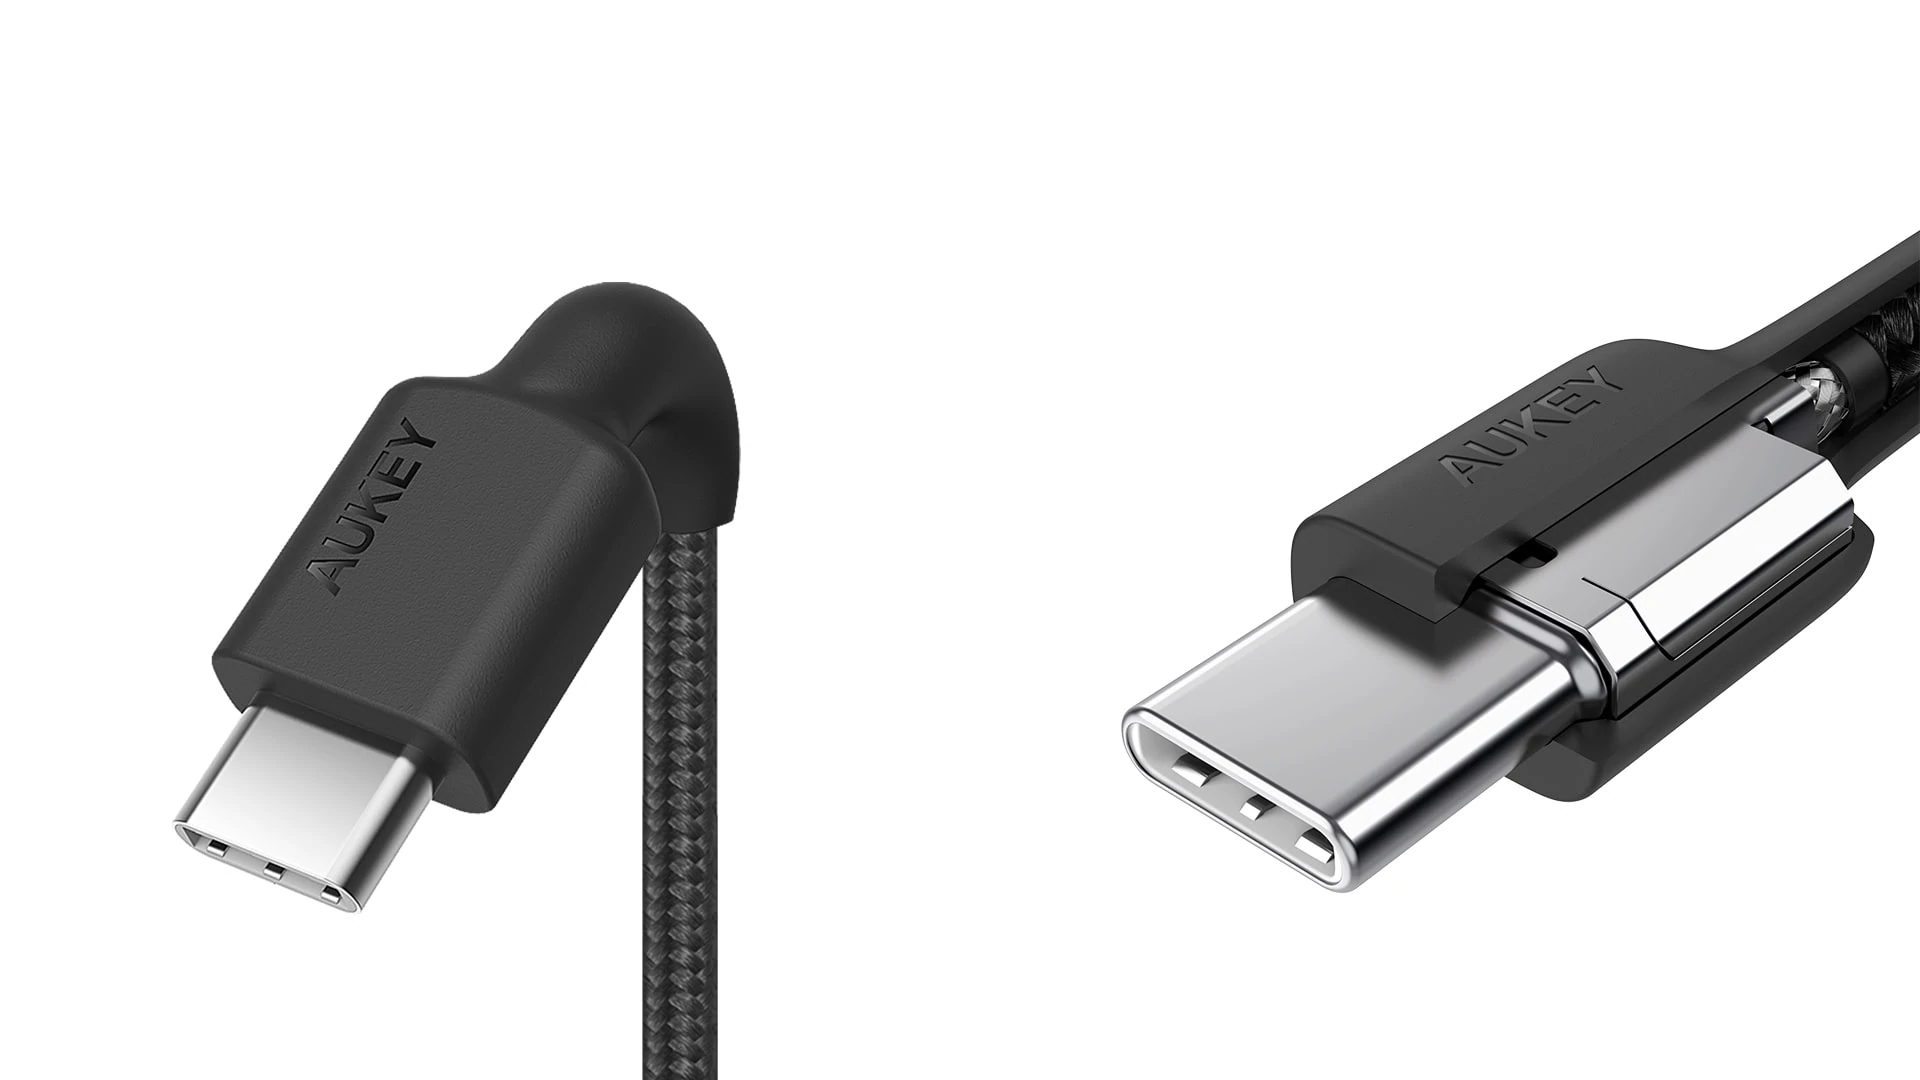 Aukey Cable Braided Nylon USB2.0, USB-C To USB-C Cable (0.9M)  Cb-Cd45